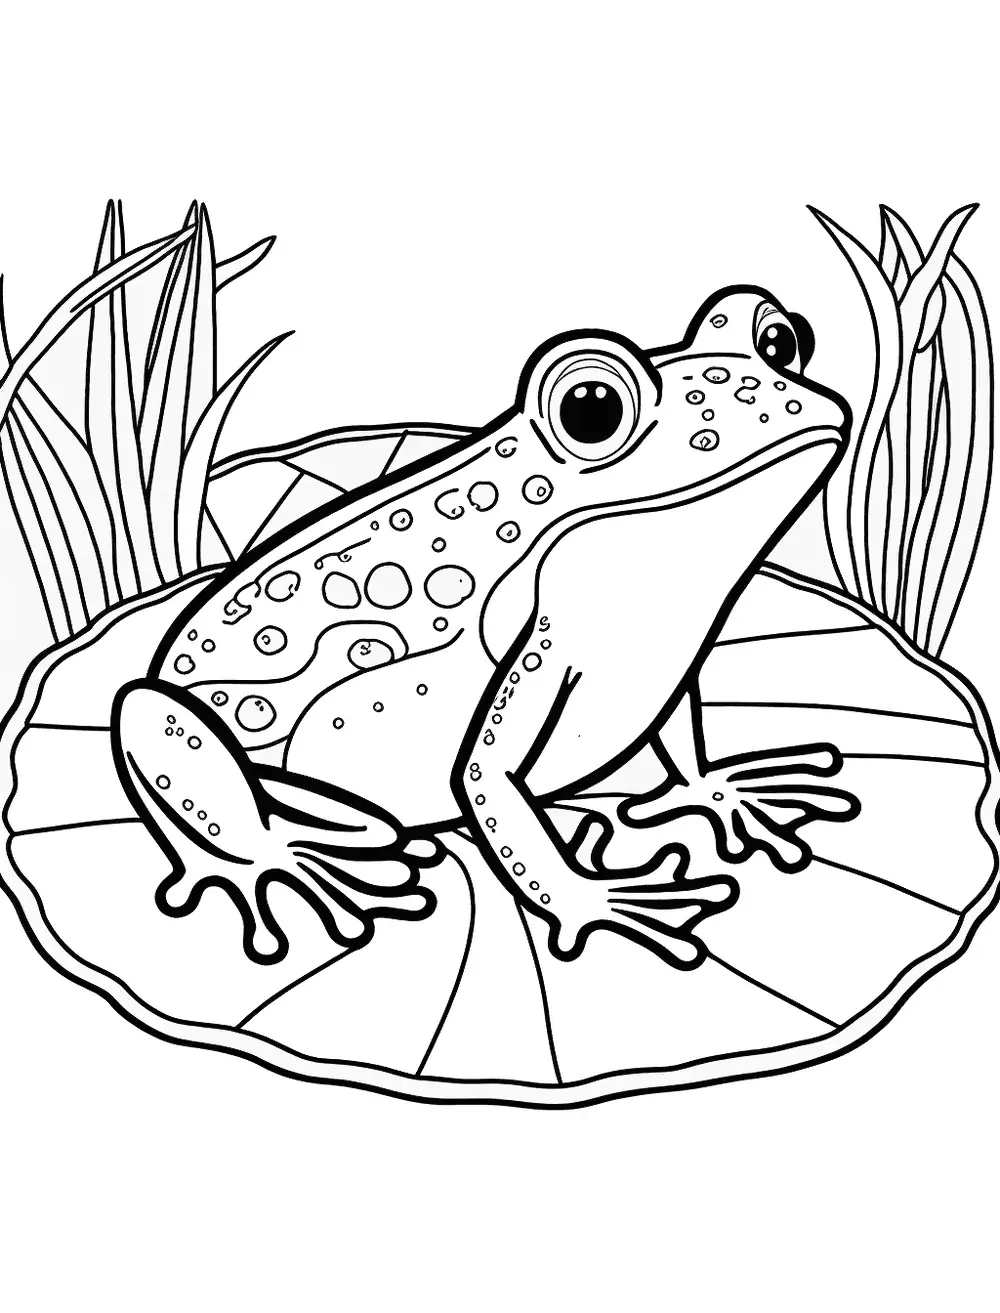 Frog coloring pages free printable sheets